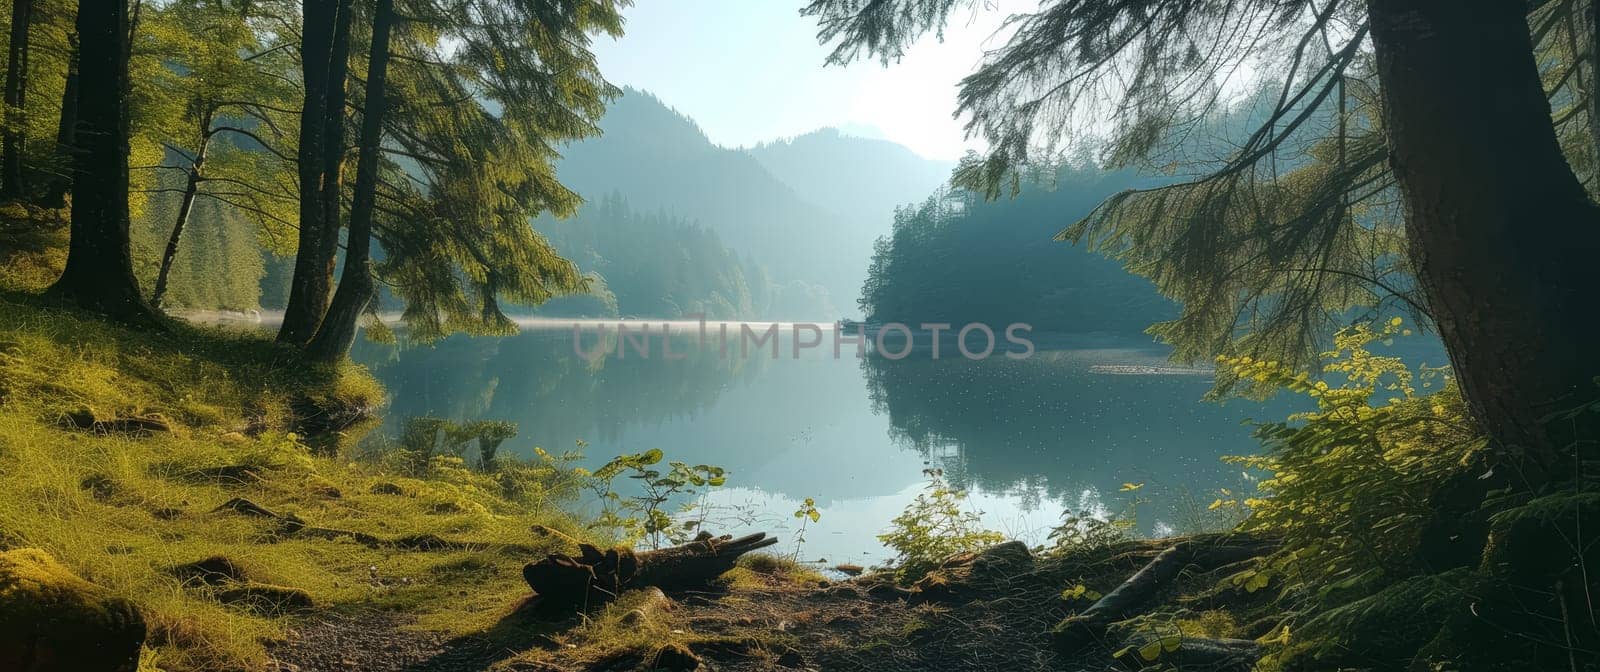 Calm lake reflecting the serene beauty of a mountain landscape and lush forests in a tranquil morning setting